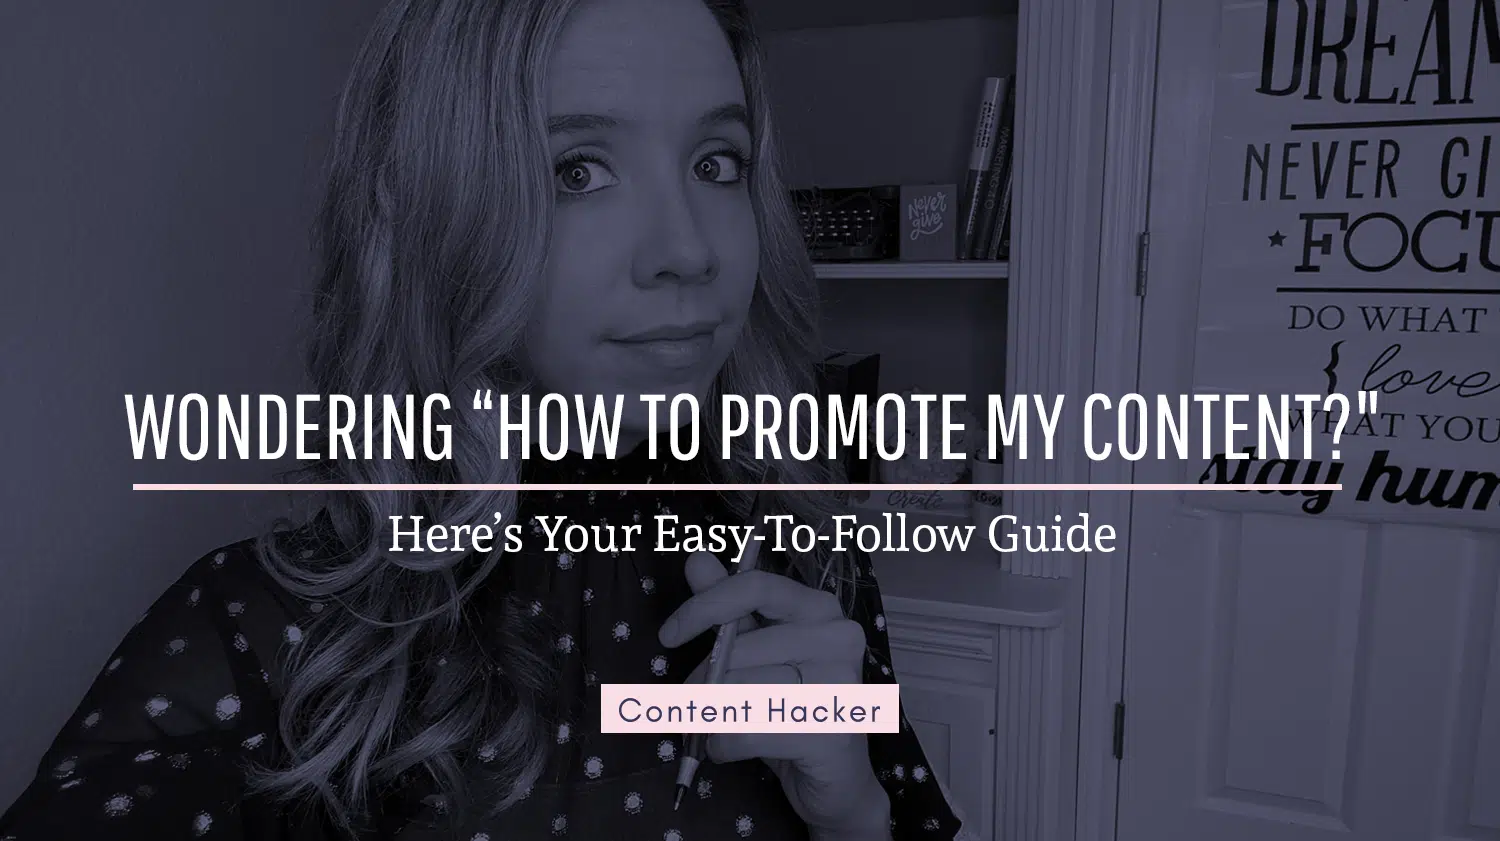 Learn how to promote your content